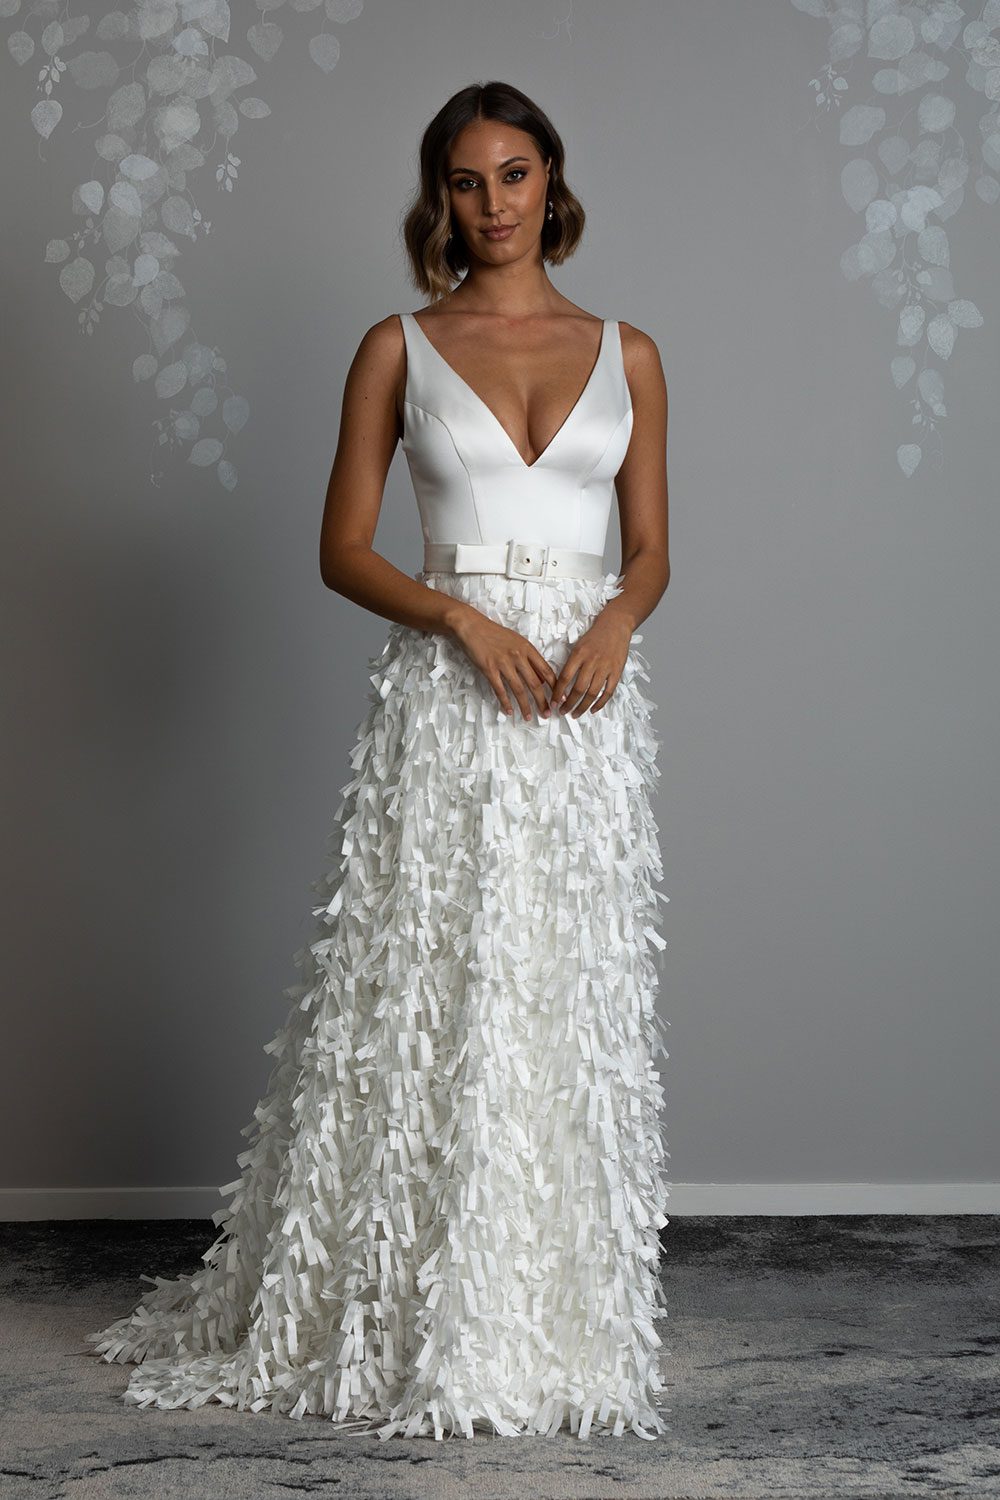 Bianca wedding dress from Vinka design. Full length view of model with hands clasped in front of belt that cinches the waist of deep V cut dress with ribbon cut skirt